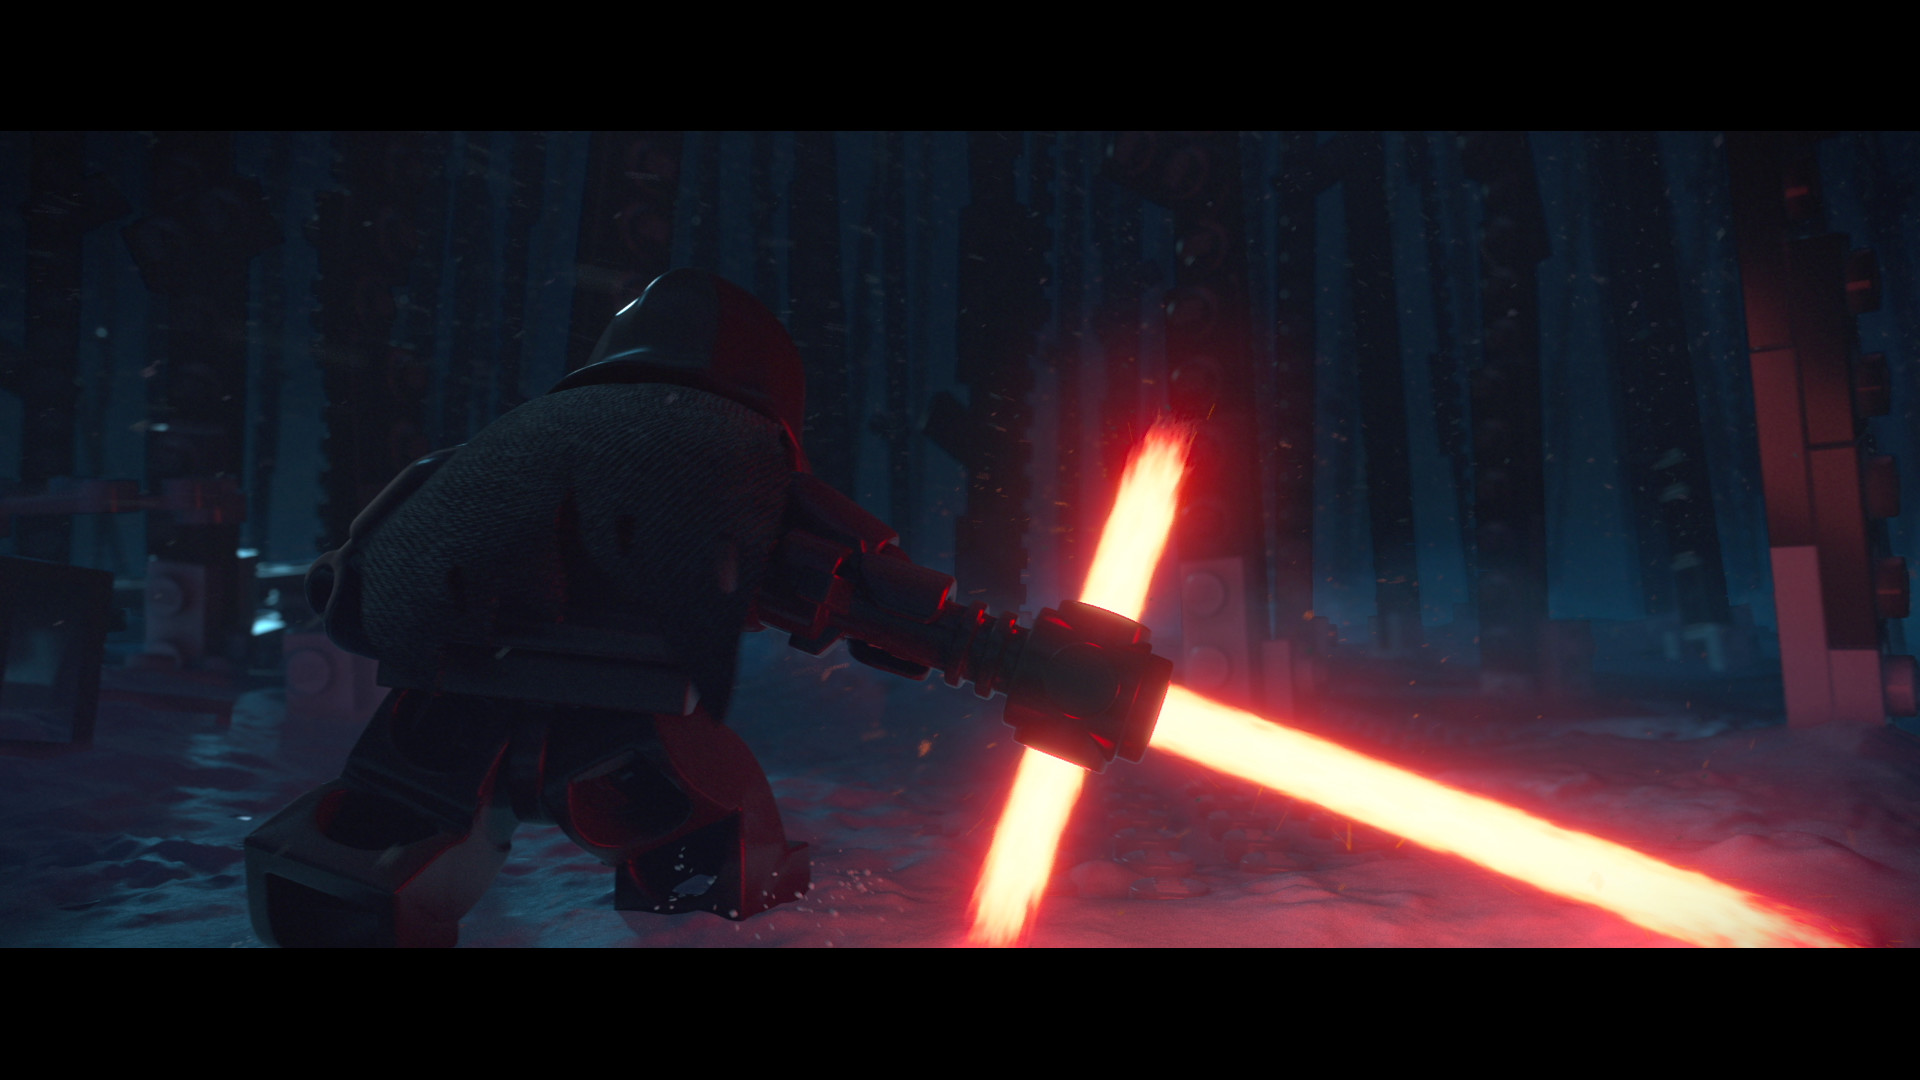 LEGO® STAR WARS™: The Force Awakens on Steam